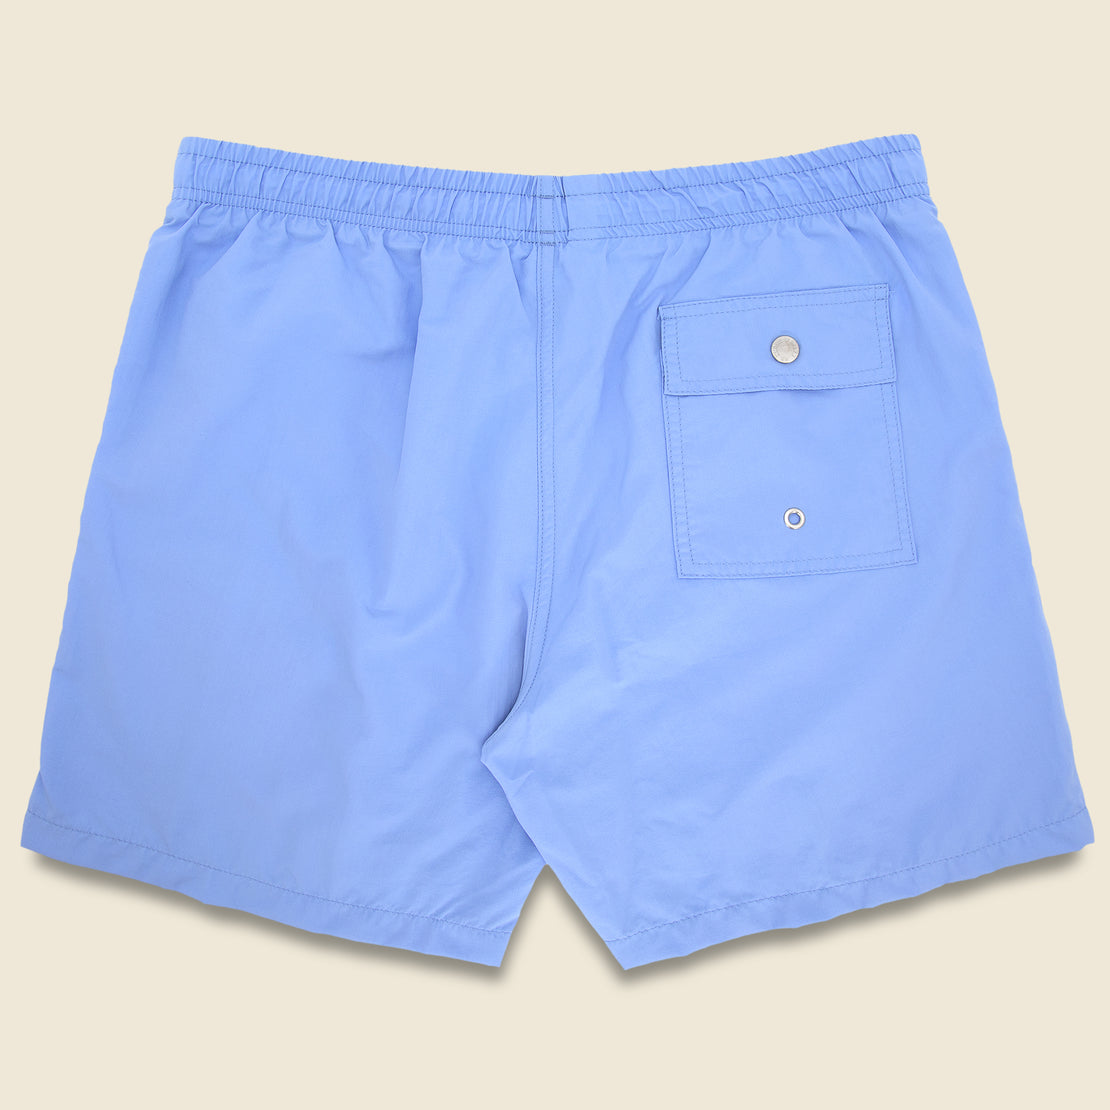 Solid Swim Trunk - Periwinkle - Bather - STAG Provisions - Shorts - Swim